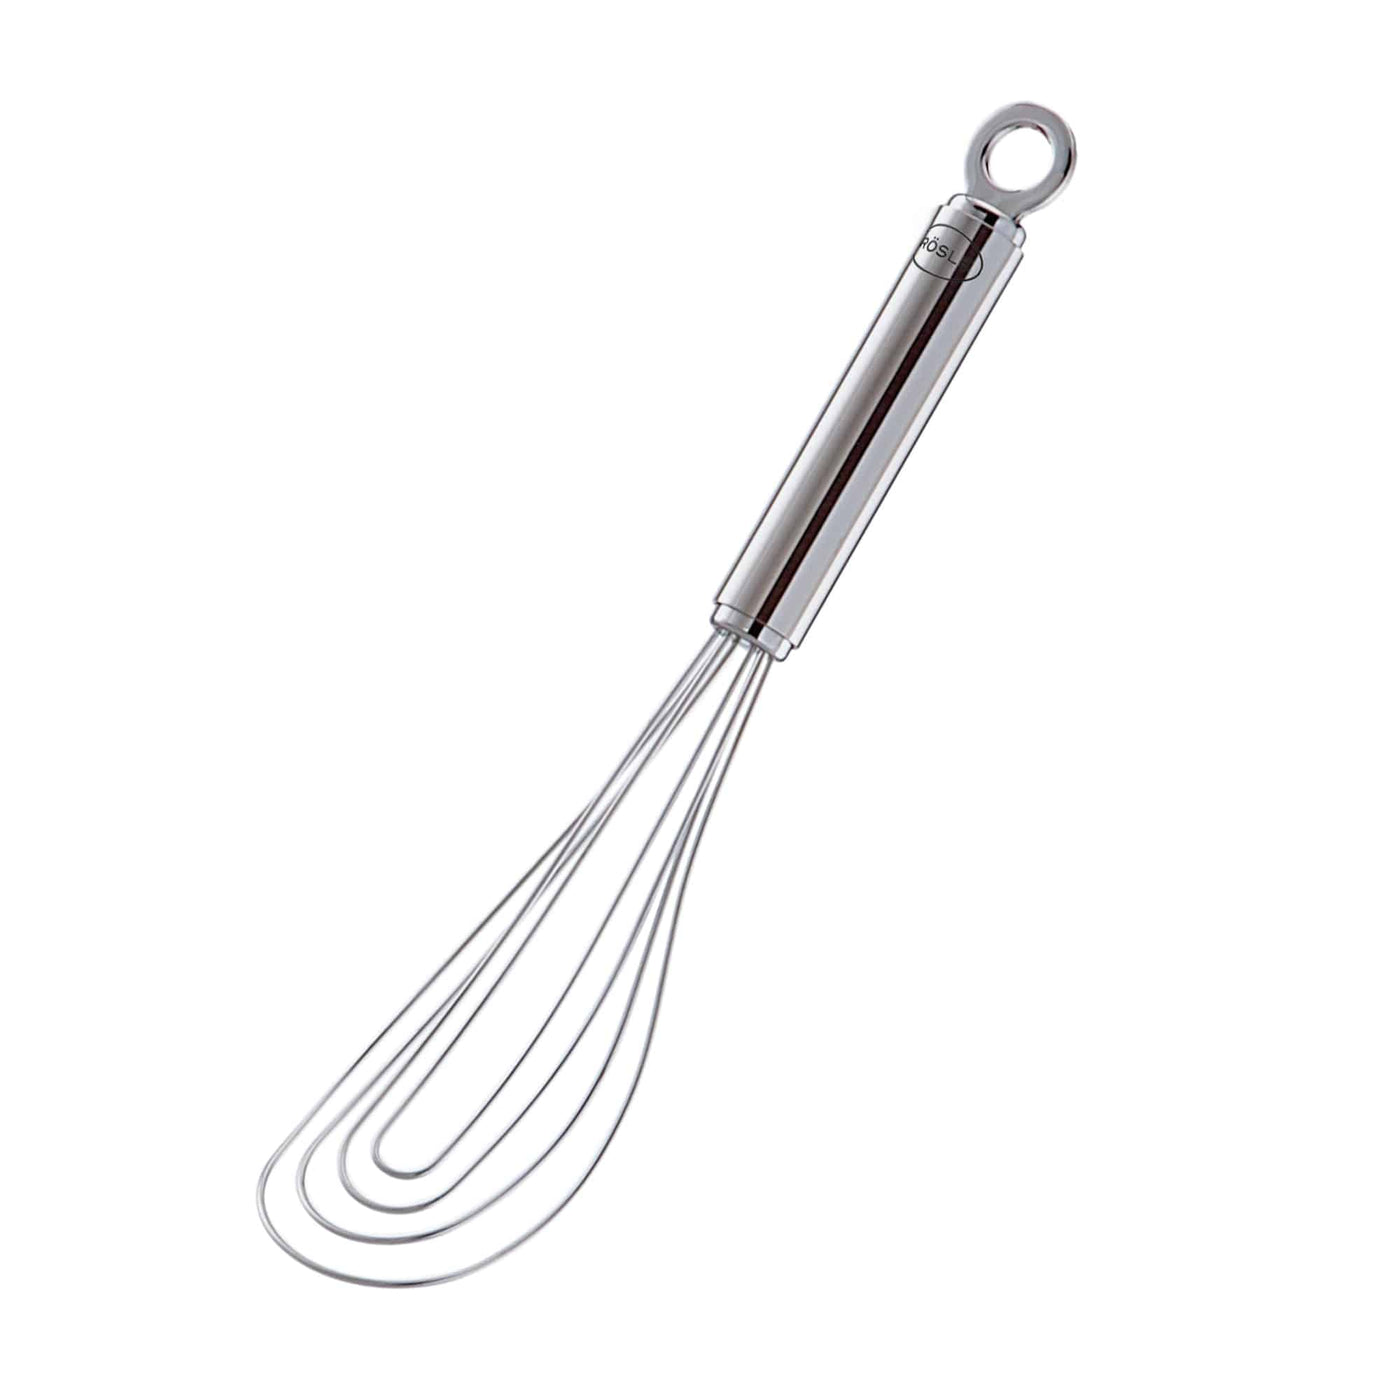 Rosle Flat Whisk, 10.6-in - Kitchen Universe